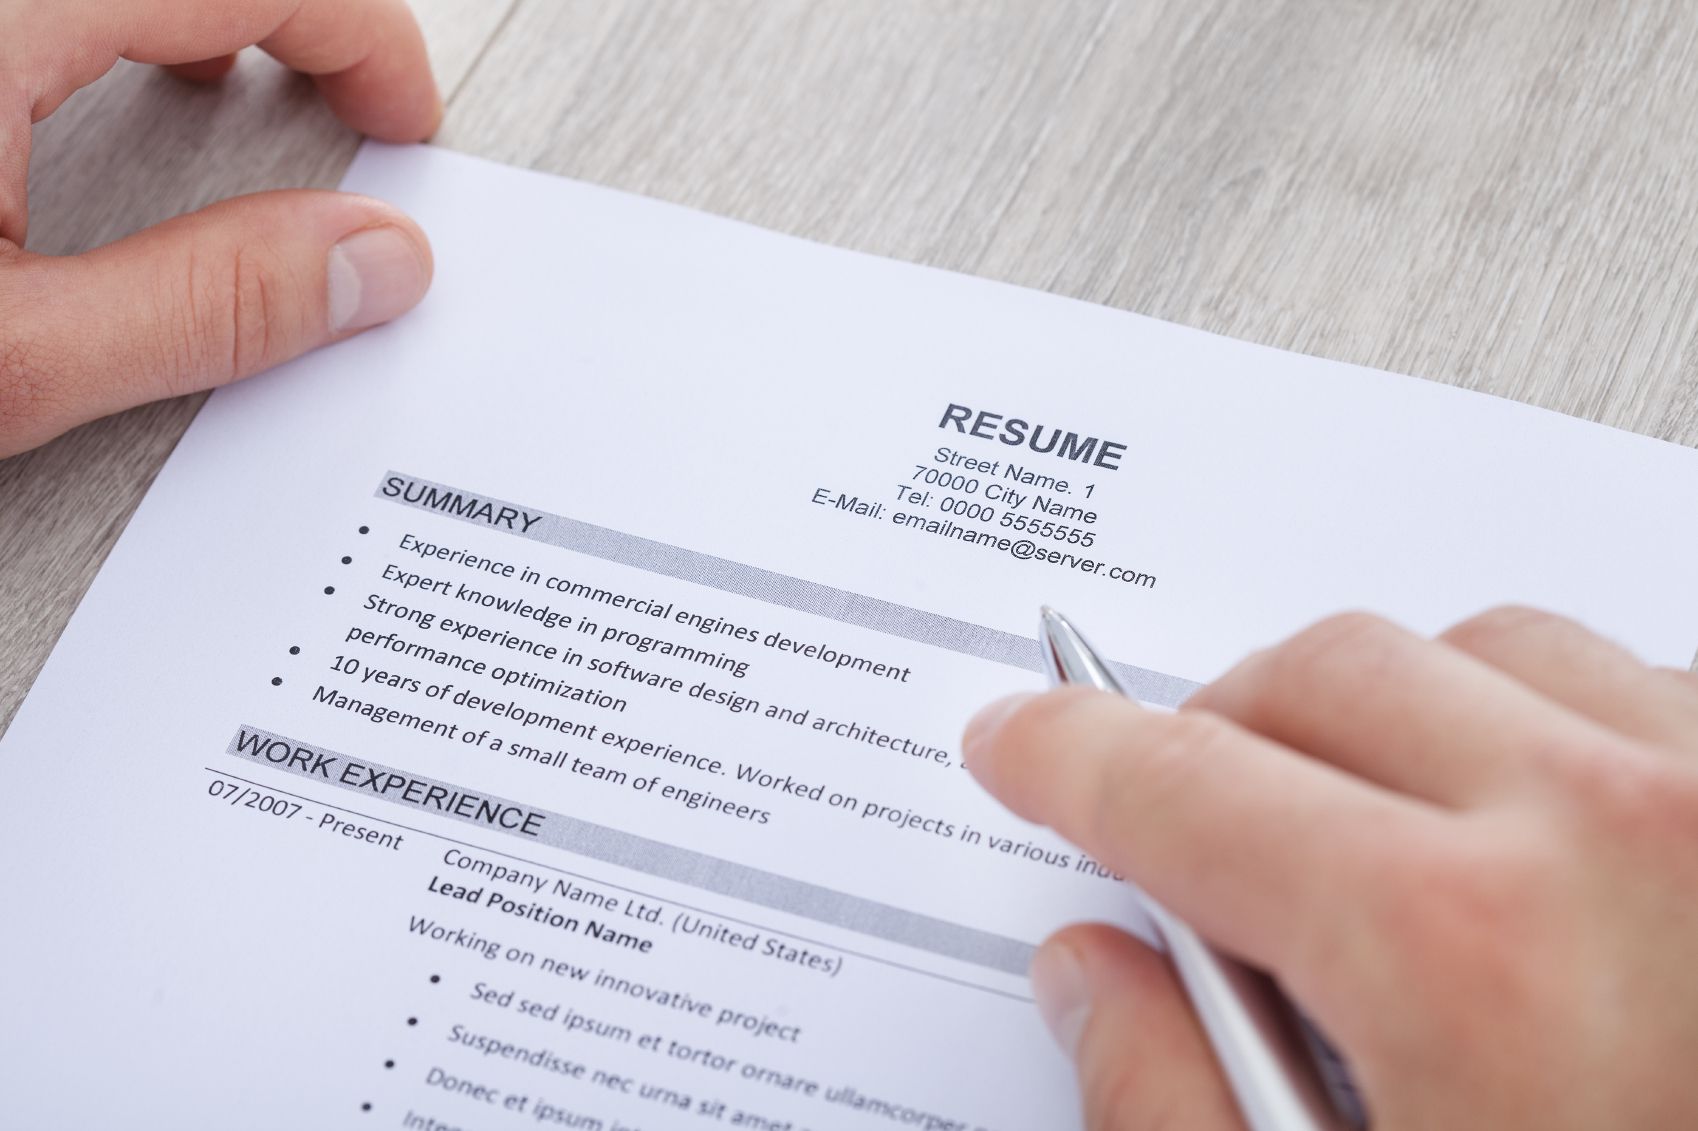 How To Write A Resume Summary Statement With Examples